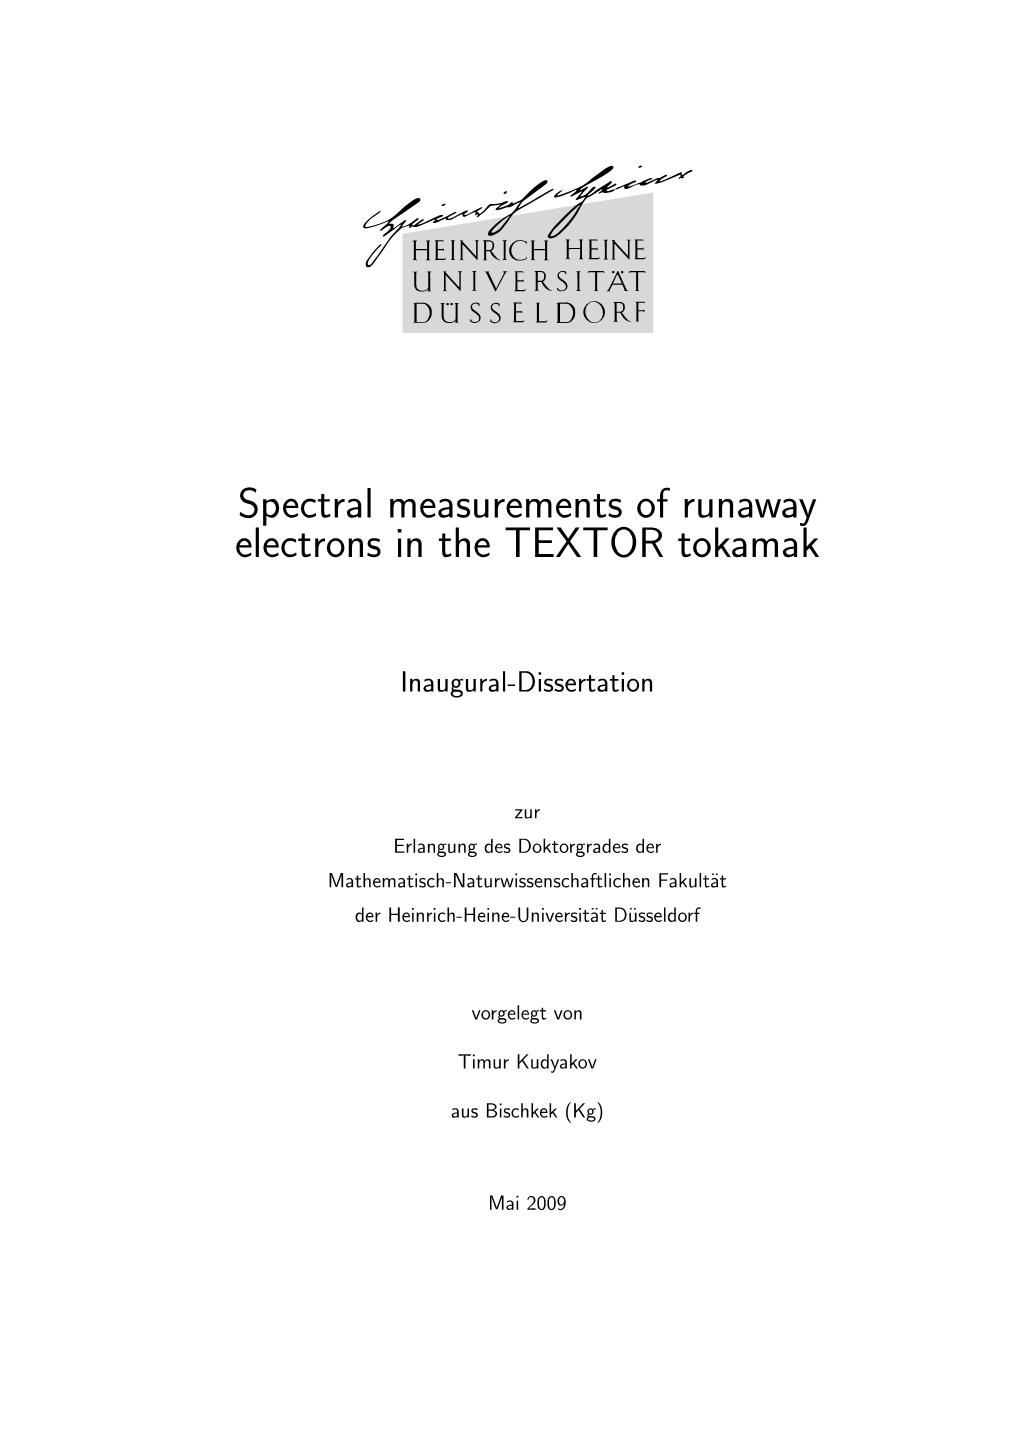 Spectral Measurements of Runaway Electrons in the TEXTOR Tokamak